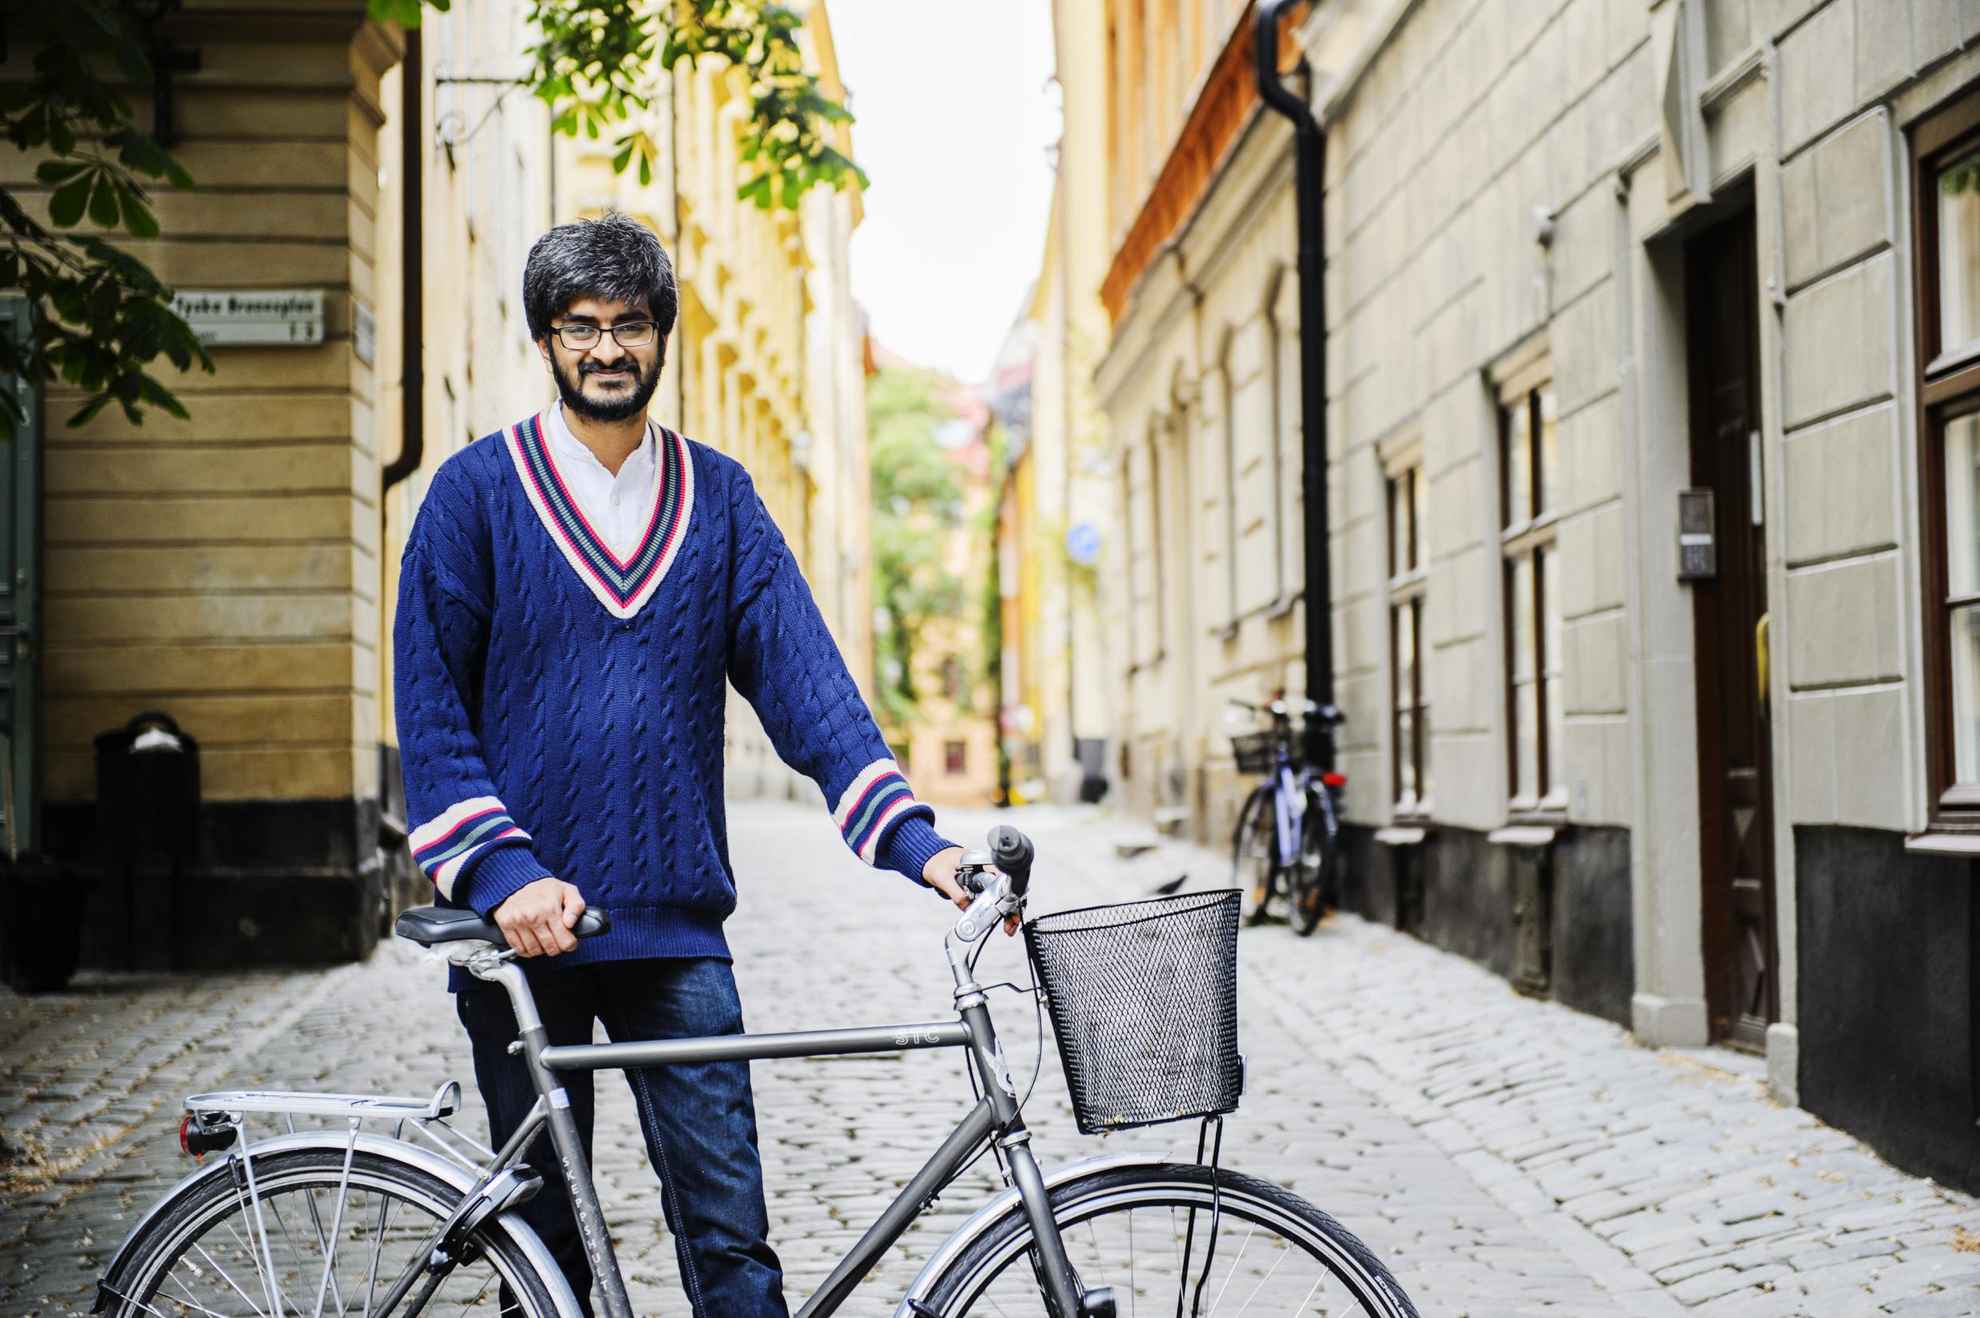 A man with a beard and glasses is standing next to his bike on one of the cobbled streets in the Old Town of Stockholm.